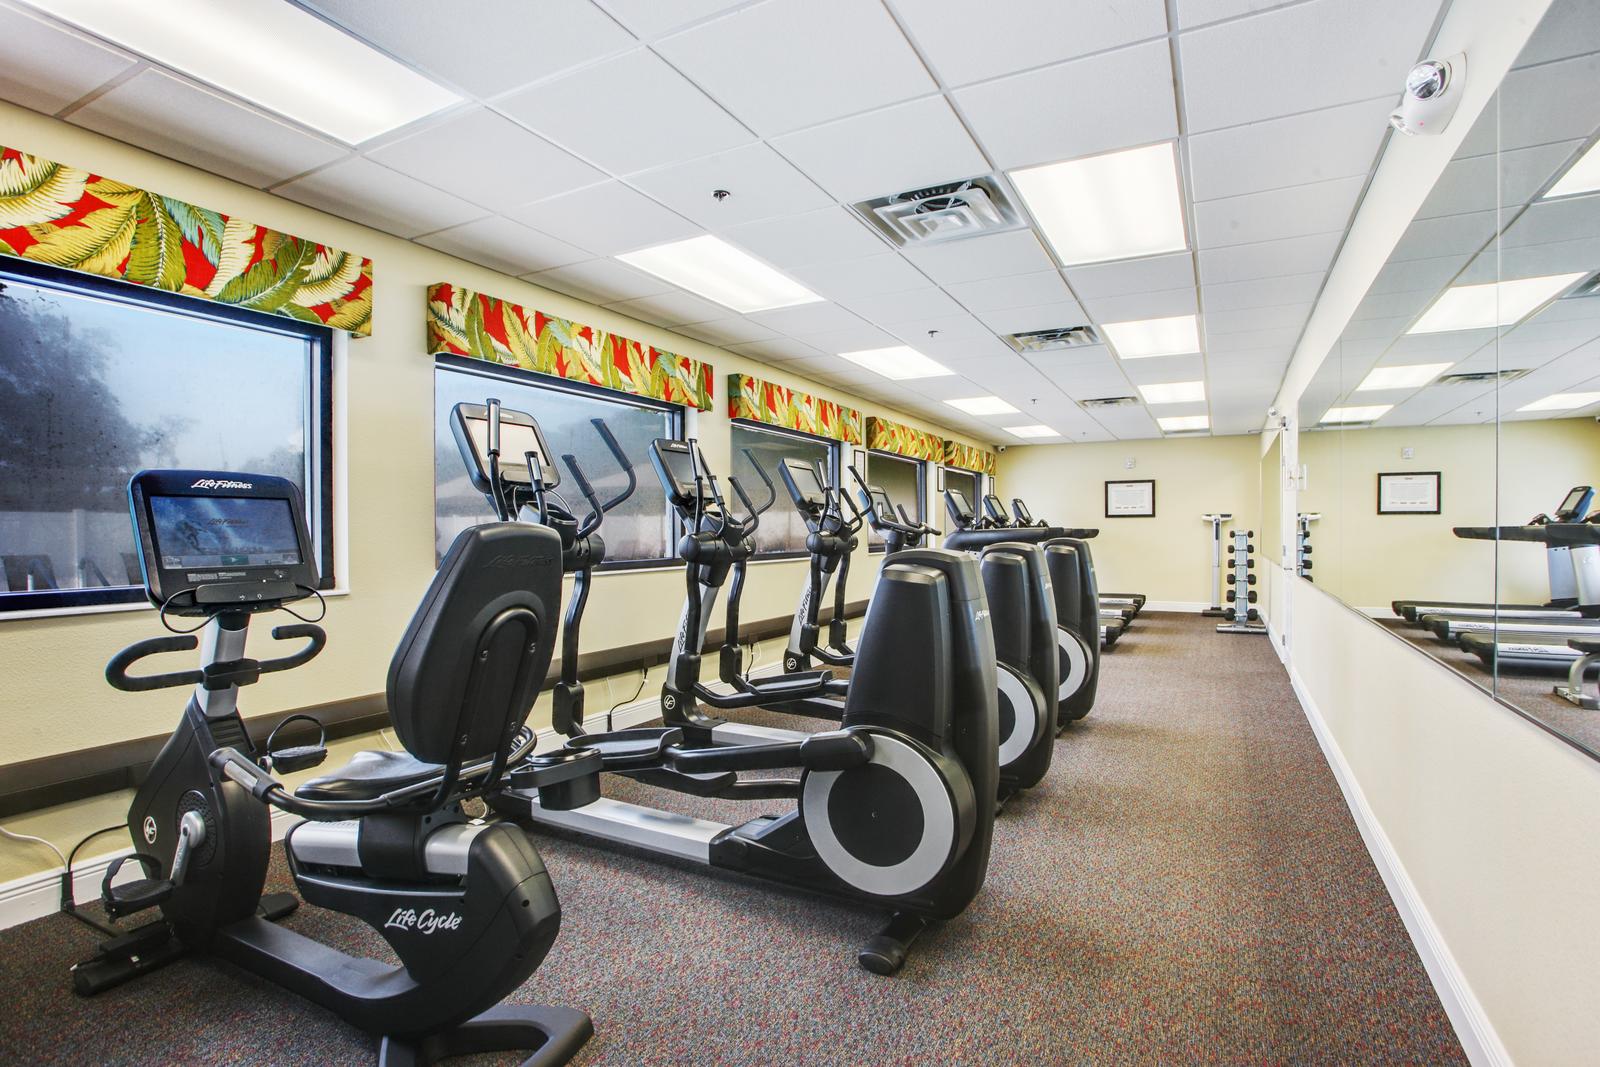 Long exercise room with stationary bikes, elliptical machines, treadmills and free weights.